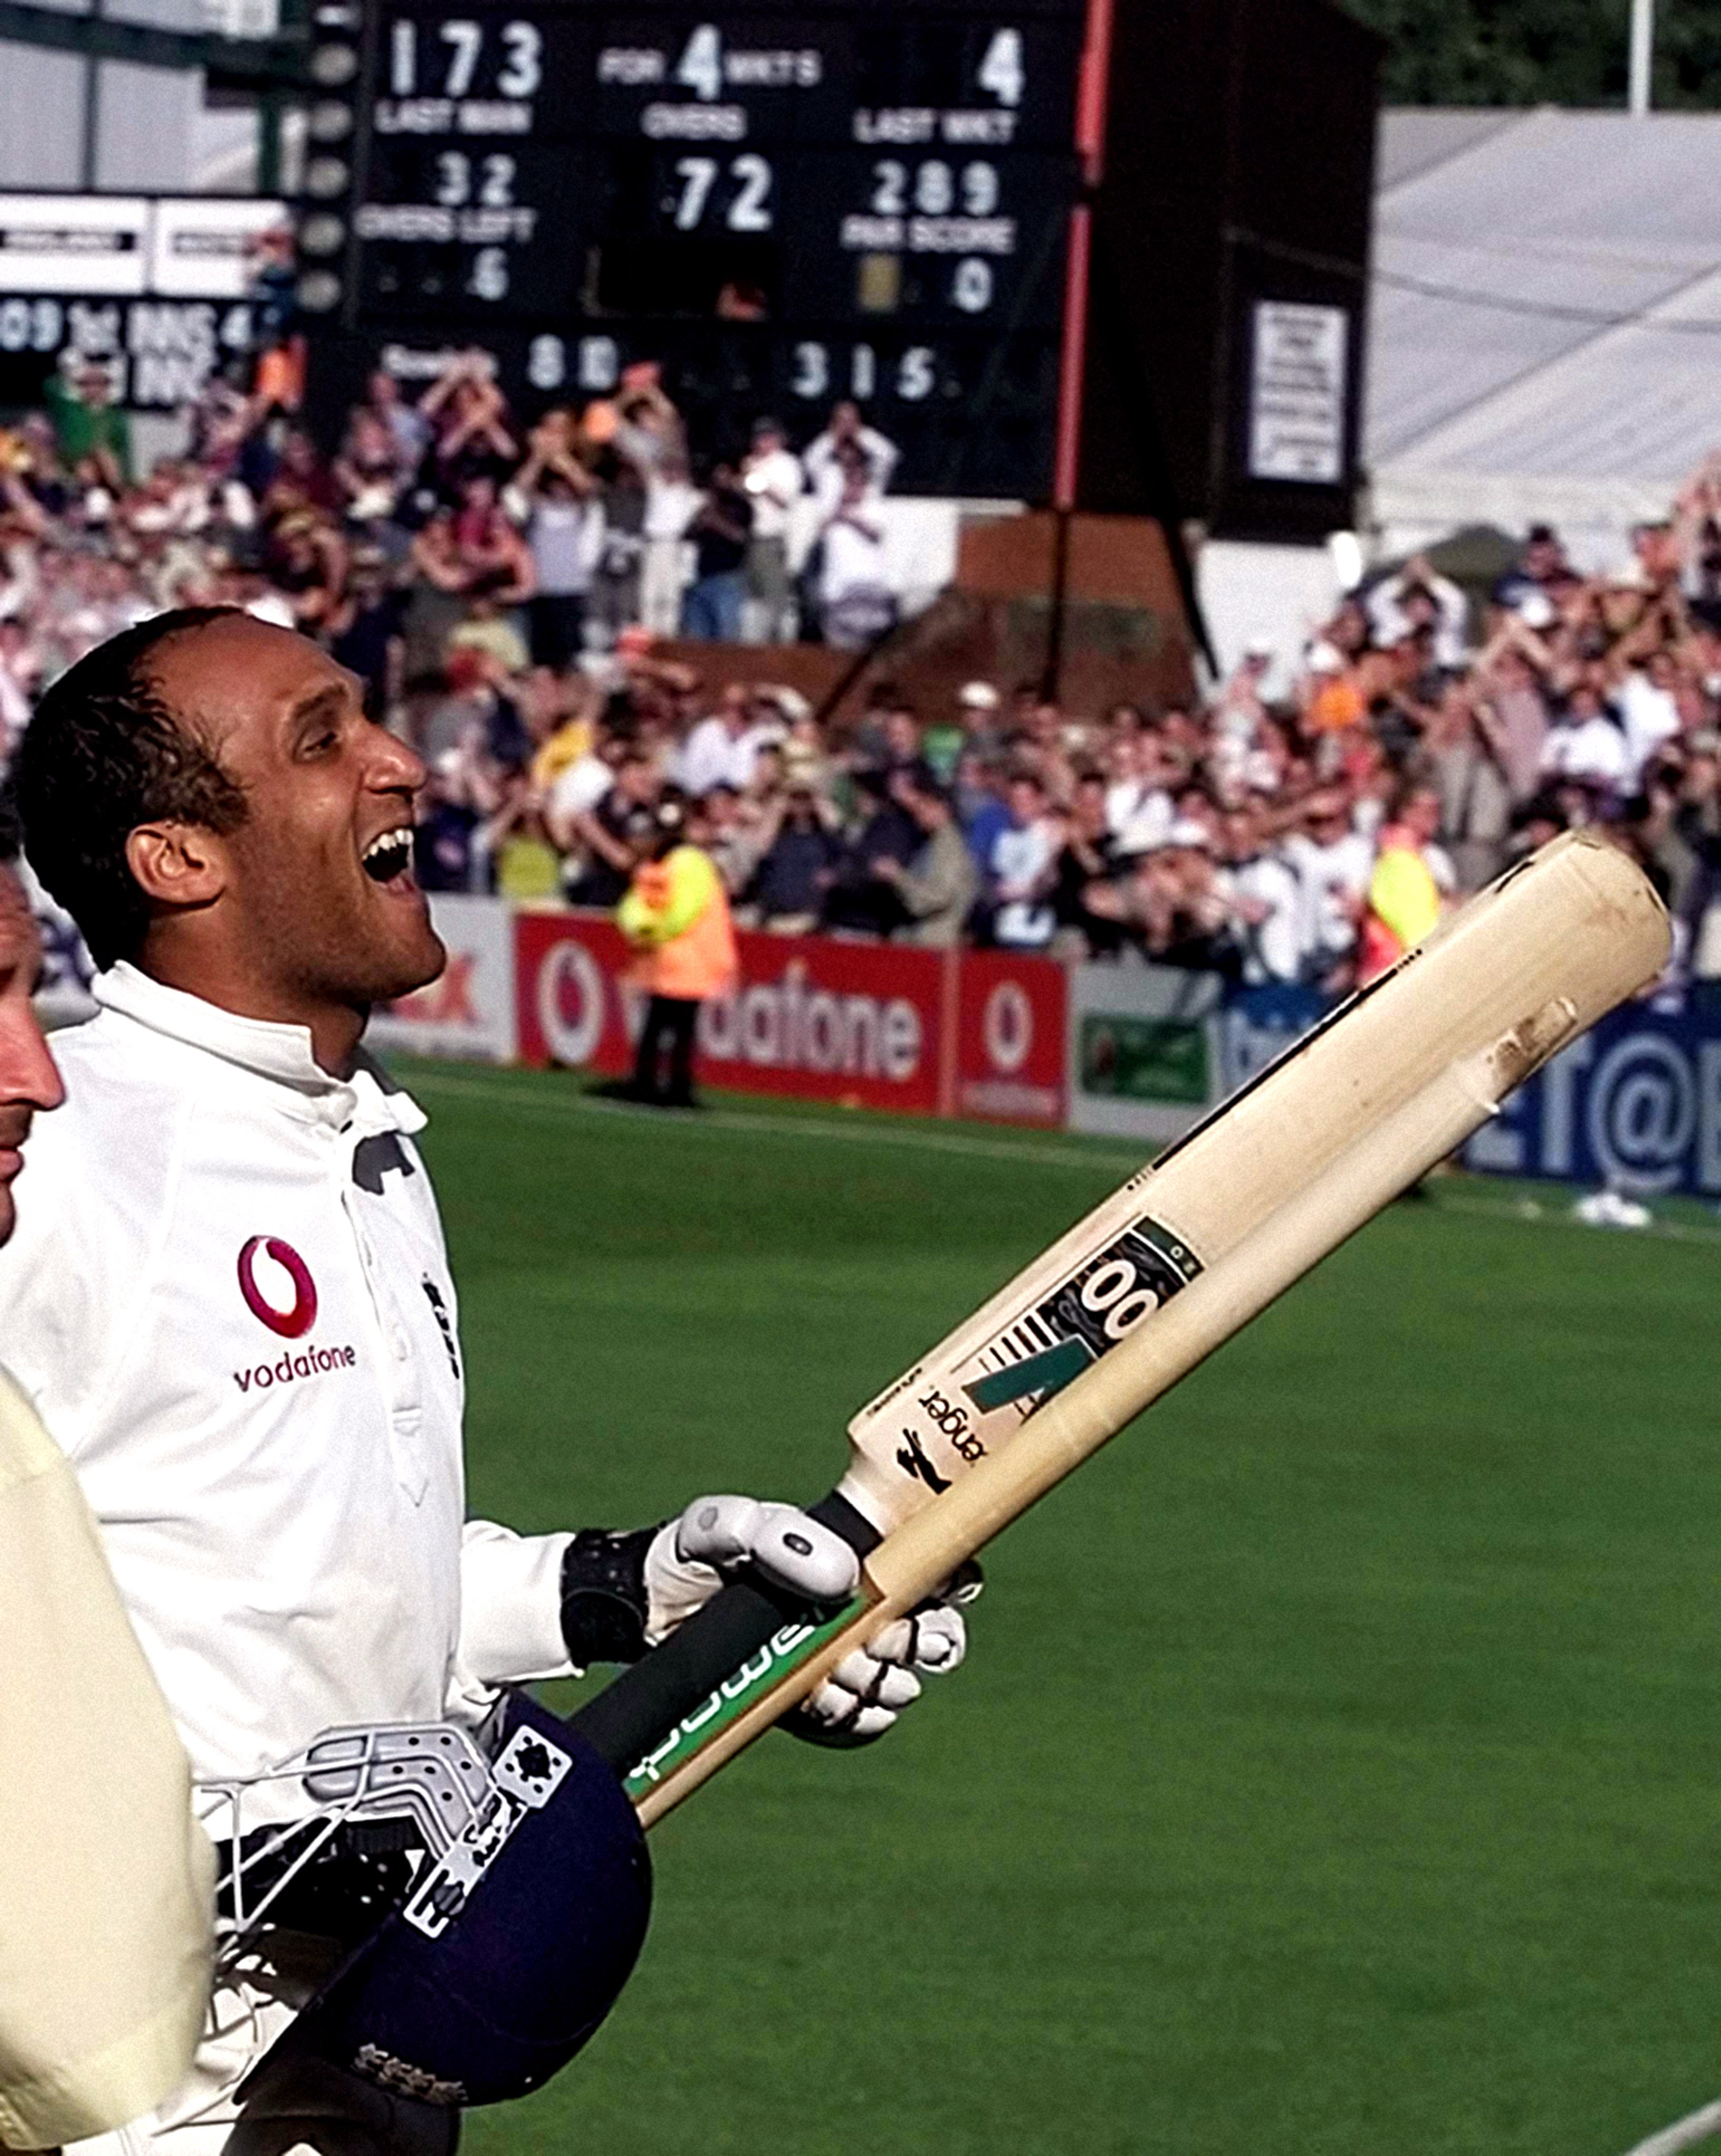 Mark Butcher celebrated after hitting the winning runs against Australia at Headingley in 2001 (Gareth Copley/PA)